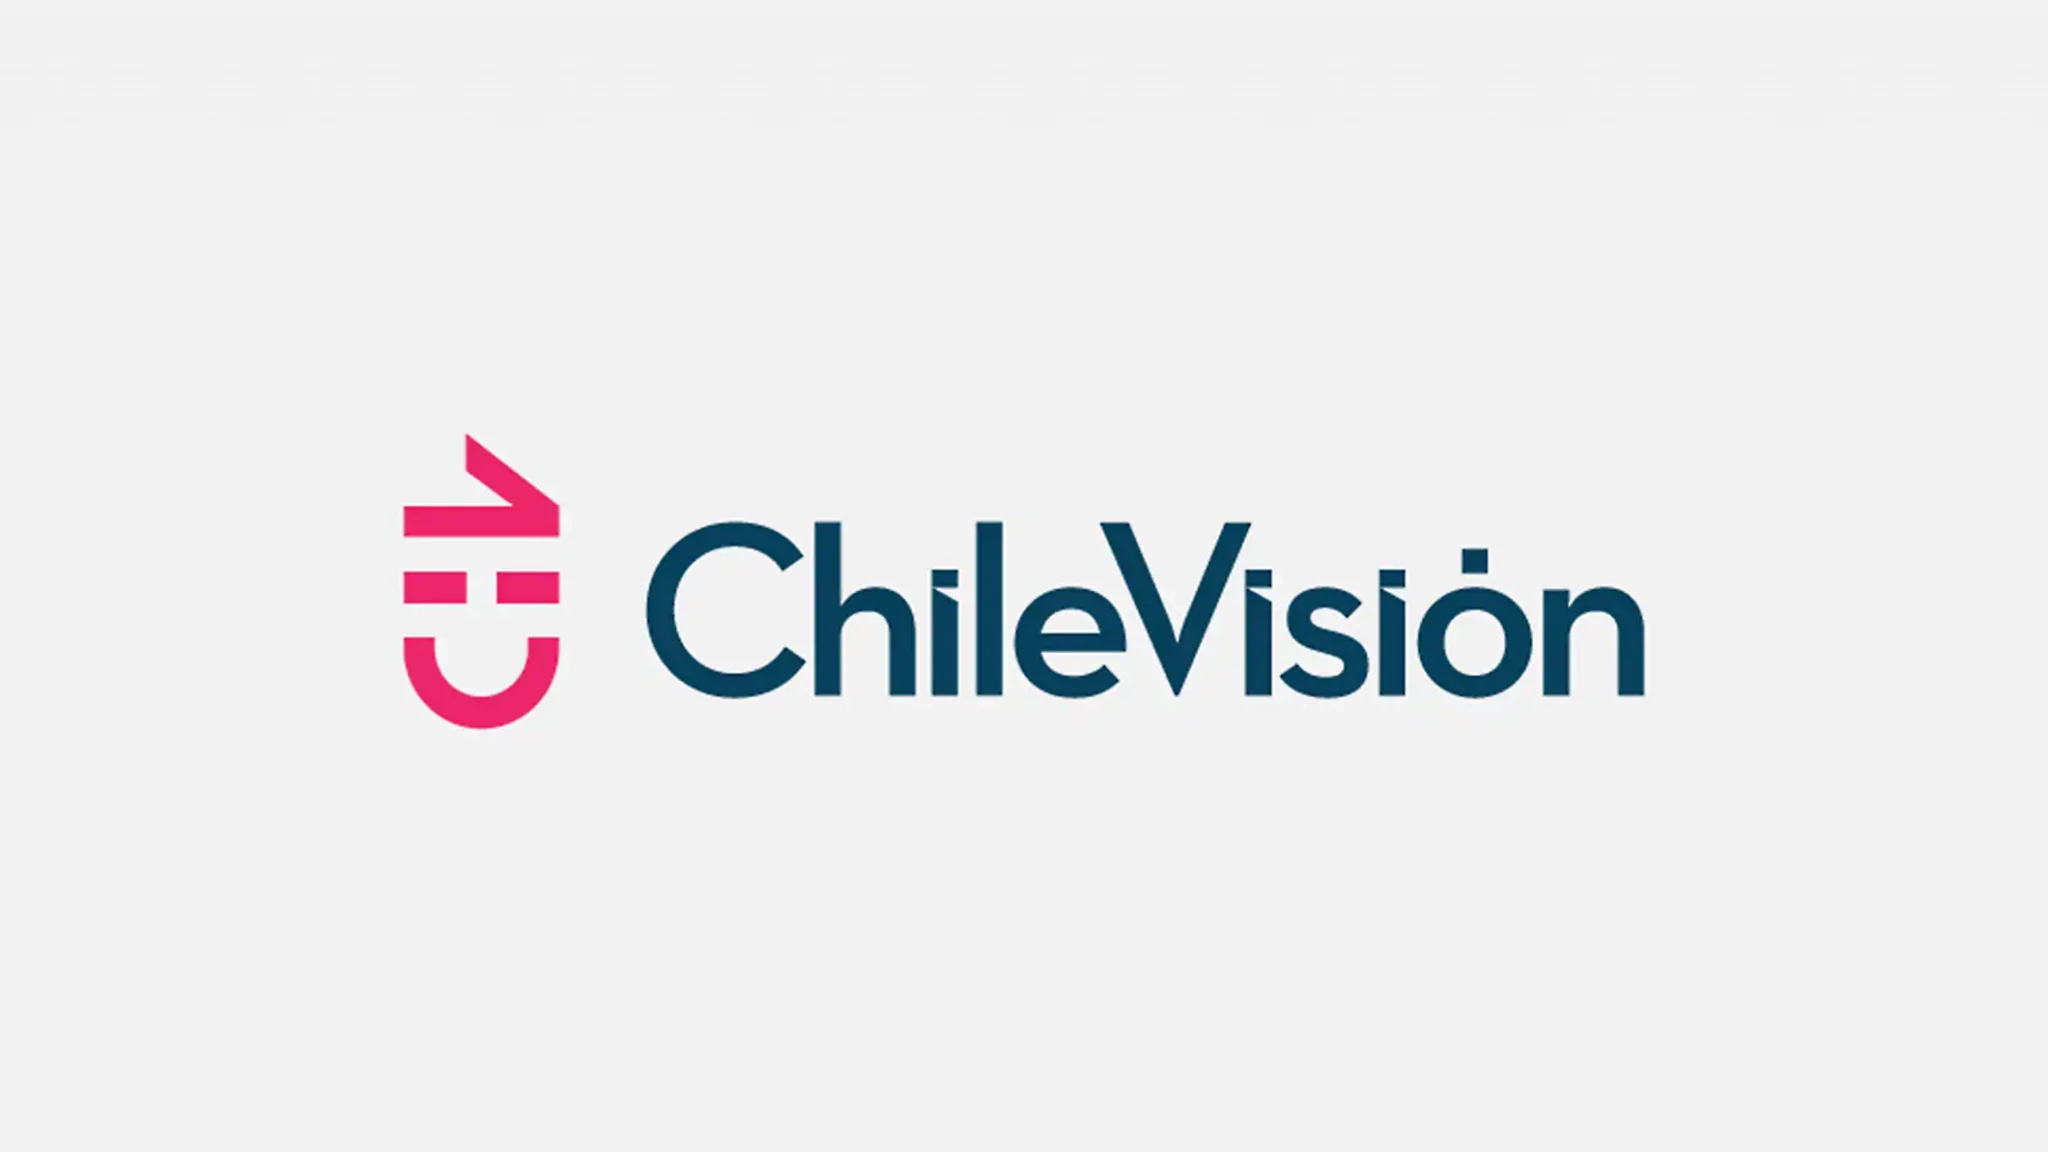 Chilevisión acquire rights to broadcast Paris 2024 in Chile